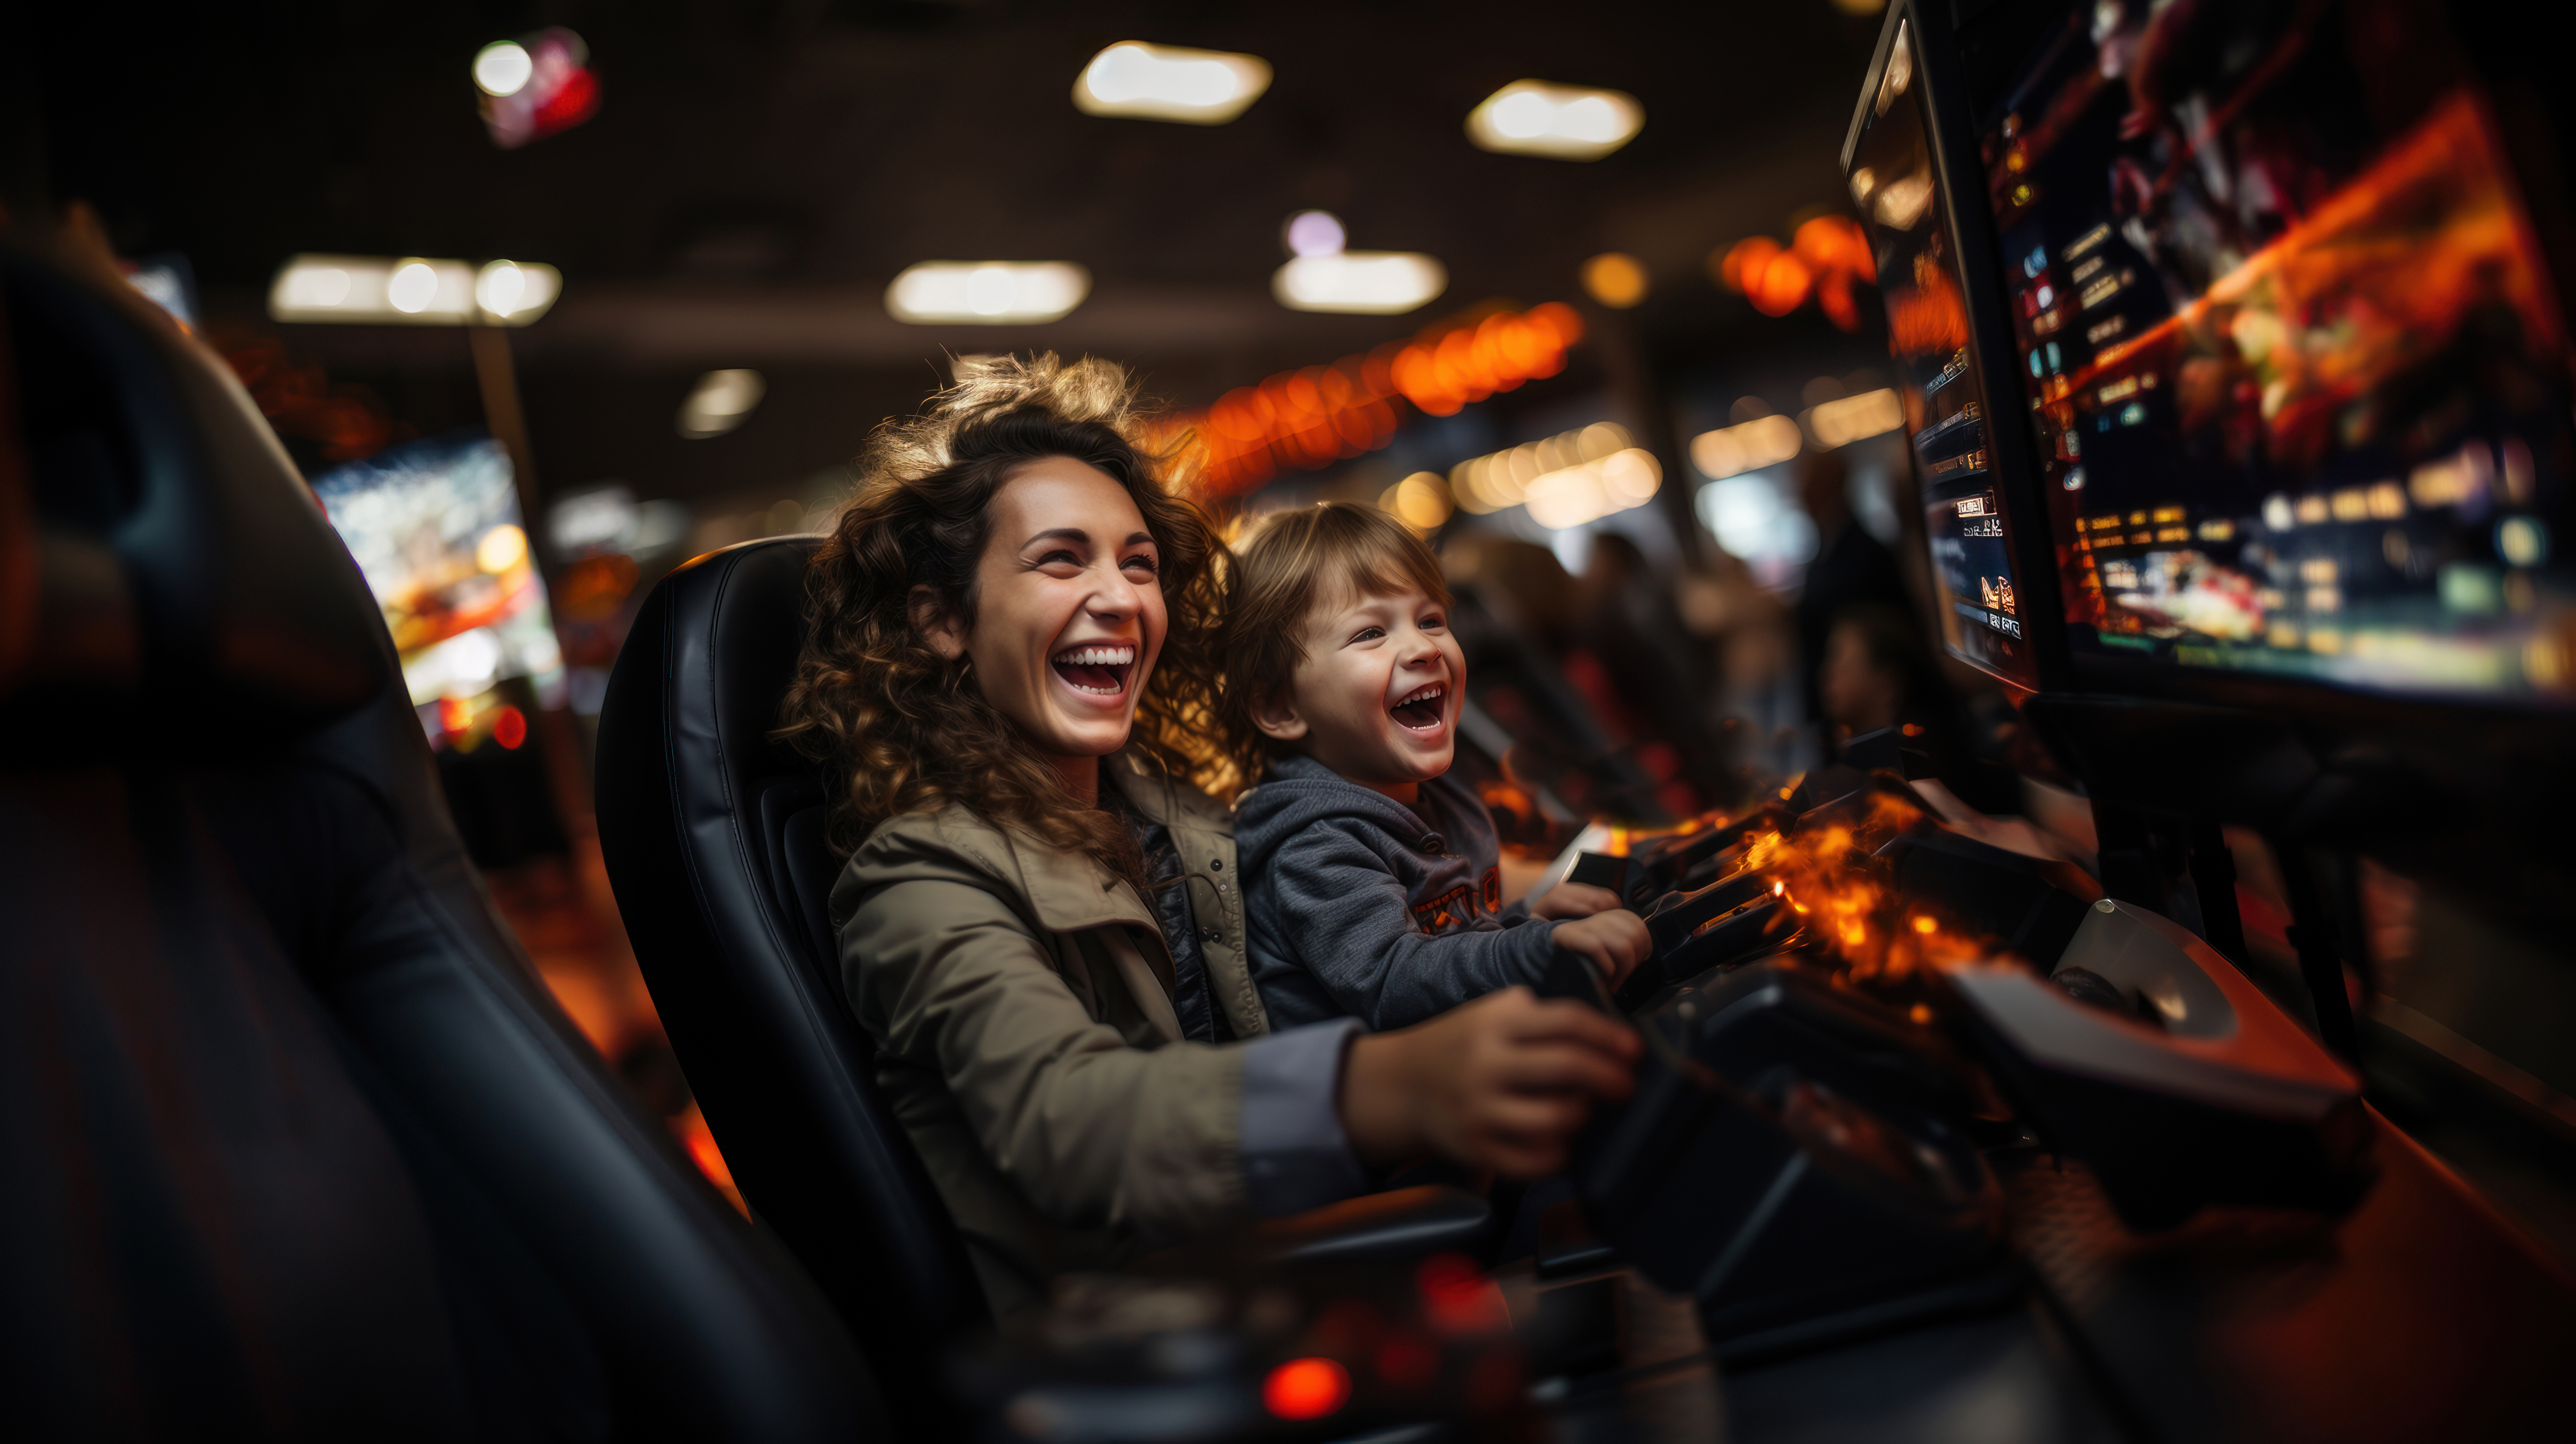 Adobe Stock with AI - mom and son in arcade, driving game